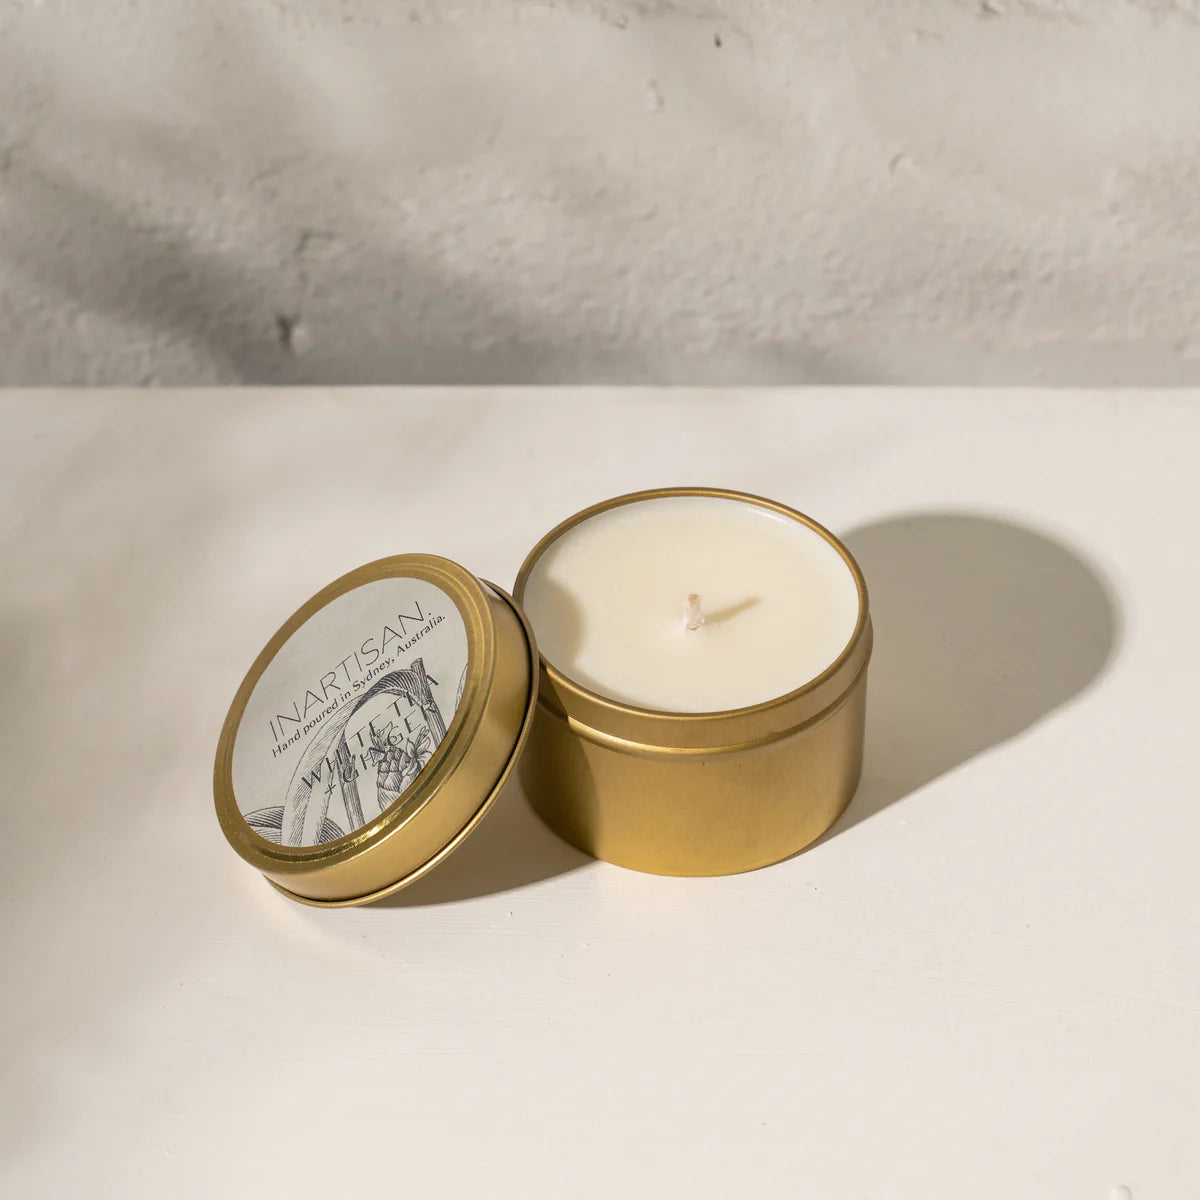 Inartisan Travel Candle - White Tea and Ginger